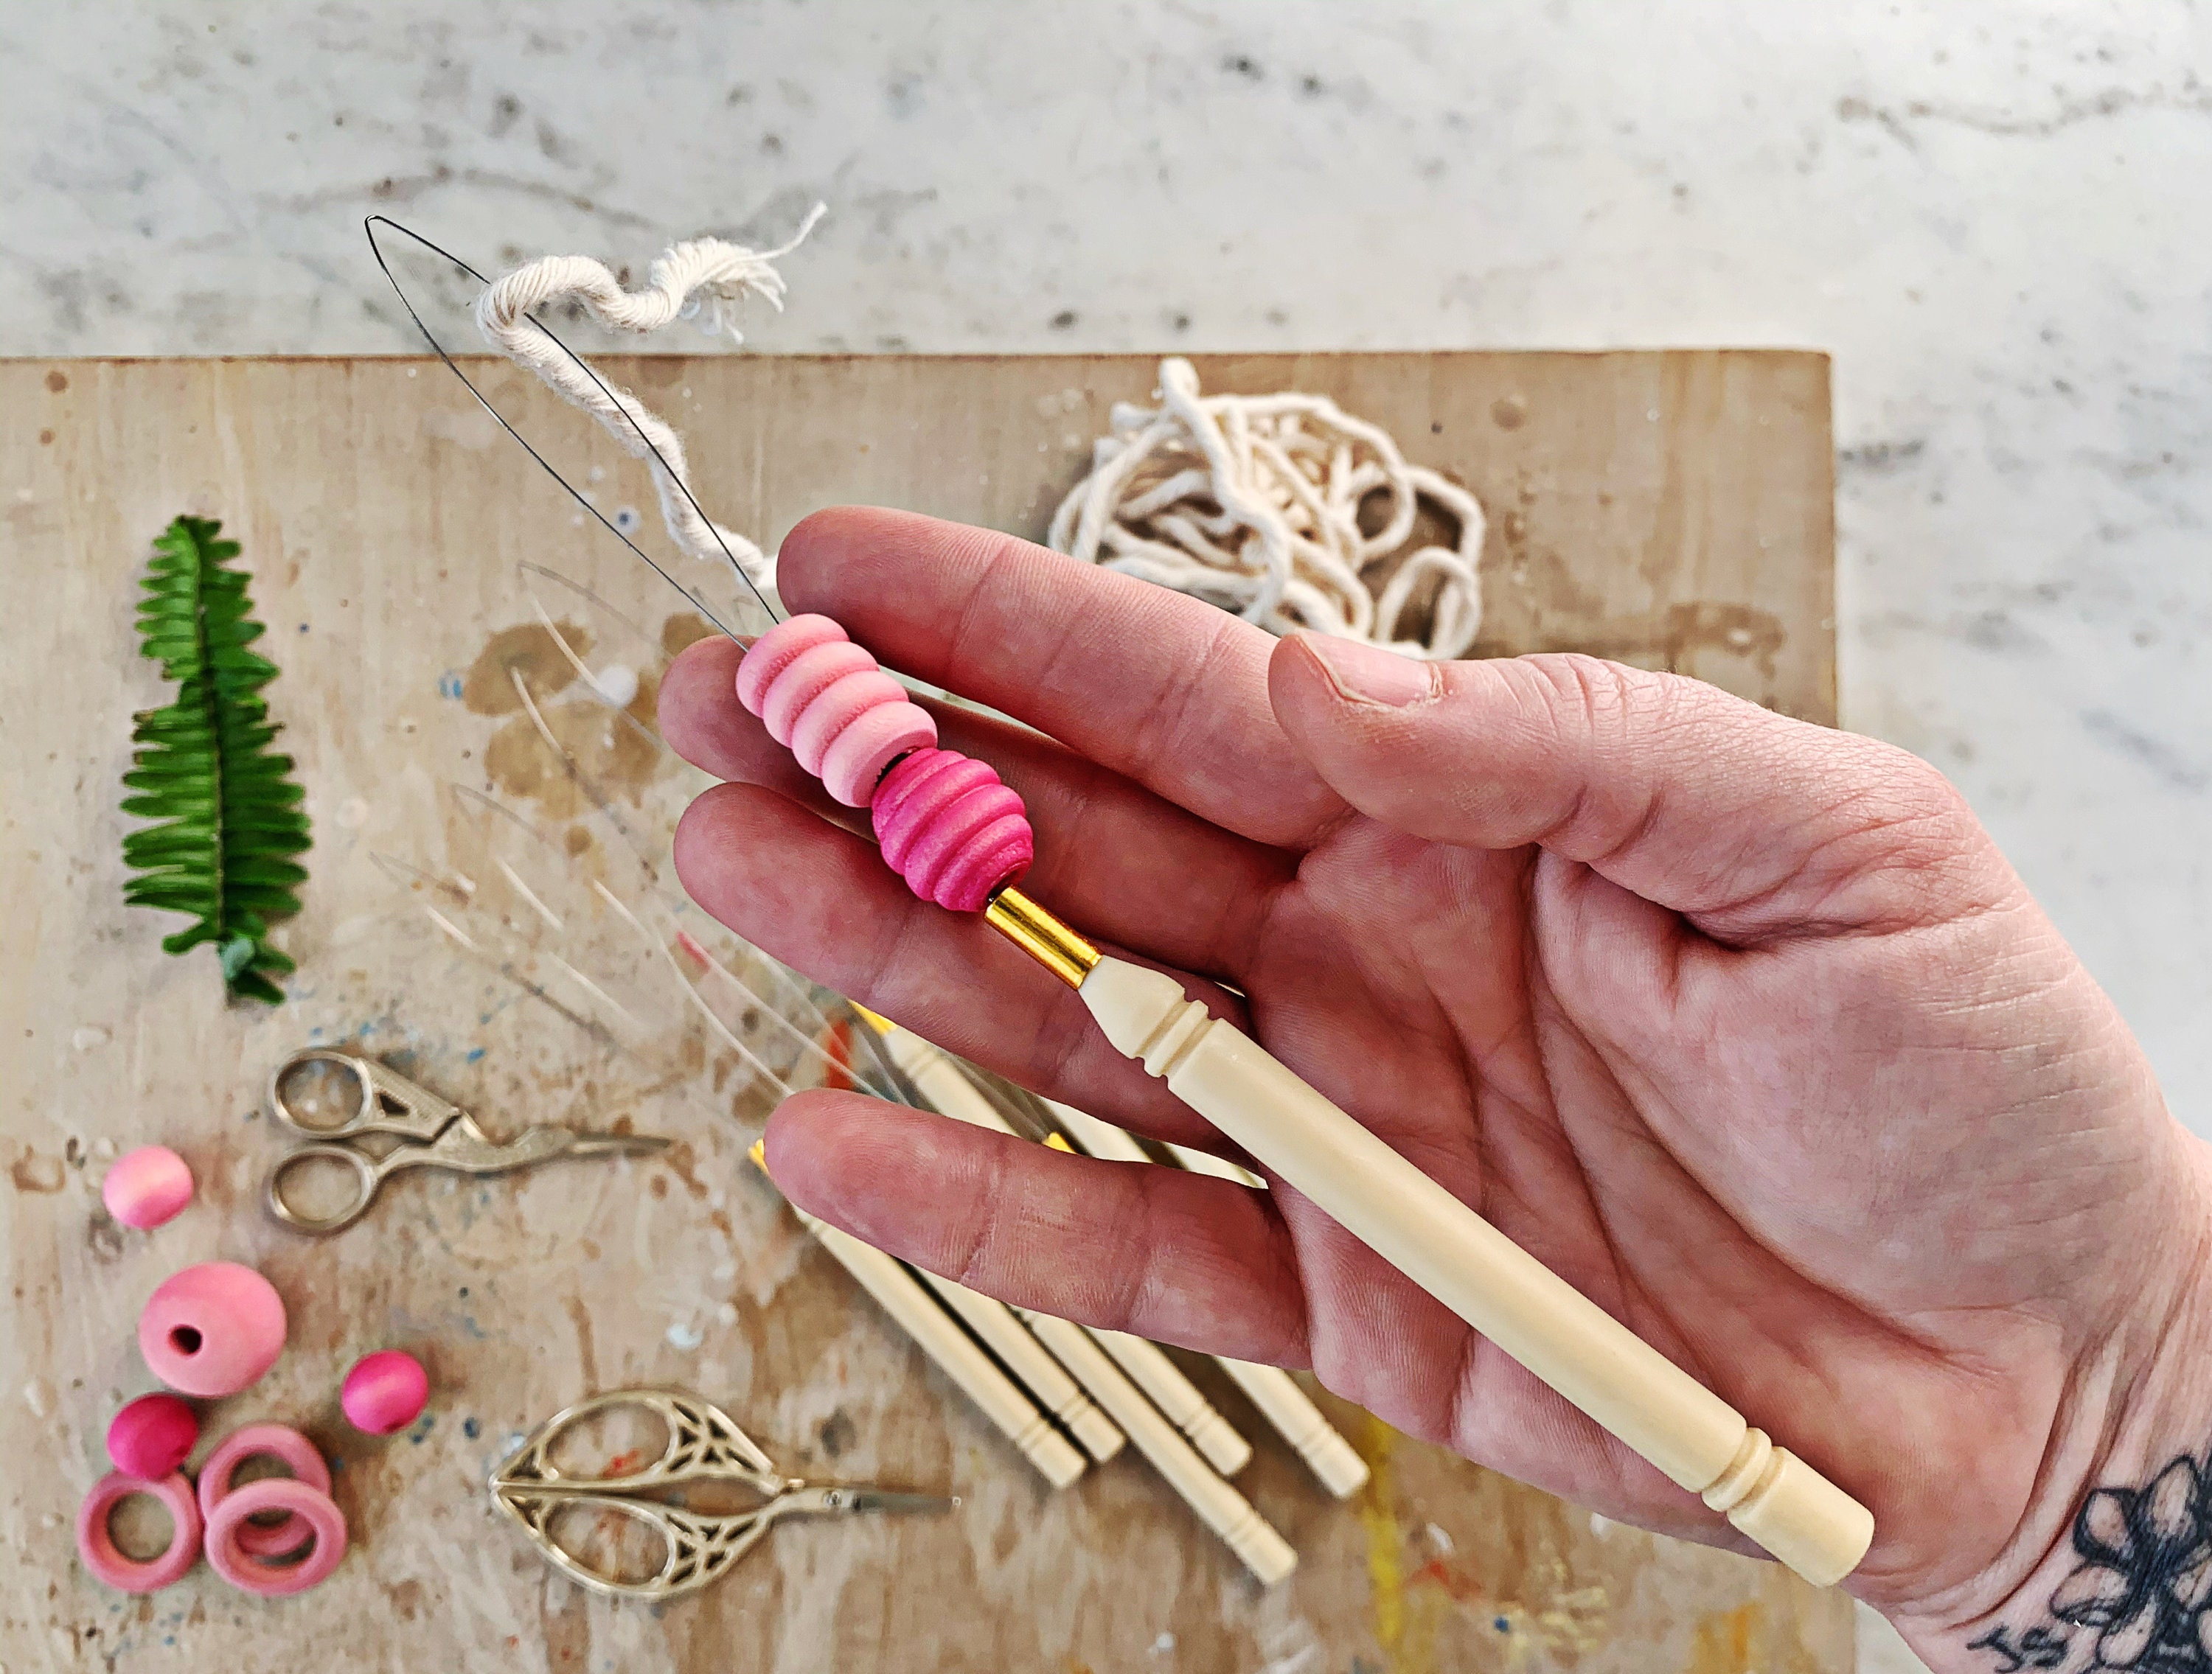 Peculiar Roots Strong Bead Threader Applicator, Apply Beads Easily with  Amazing Tool